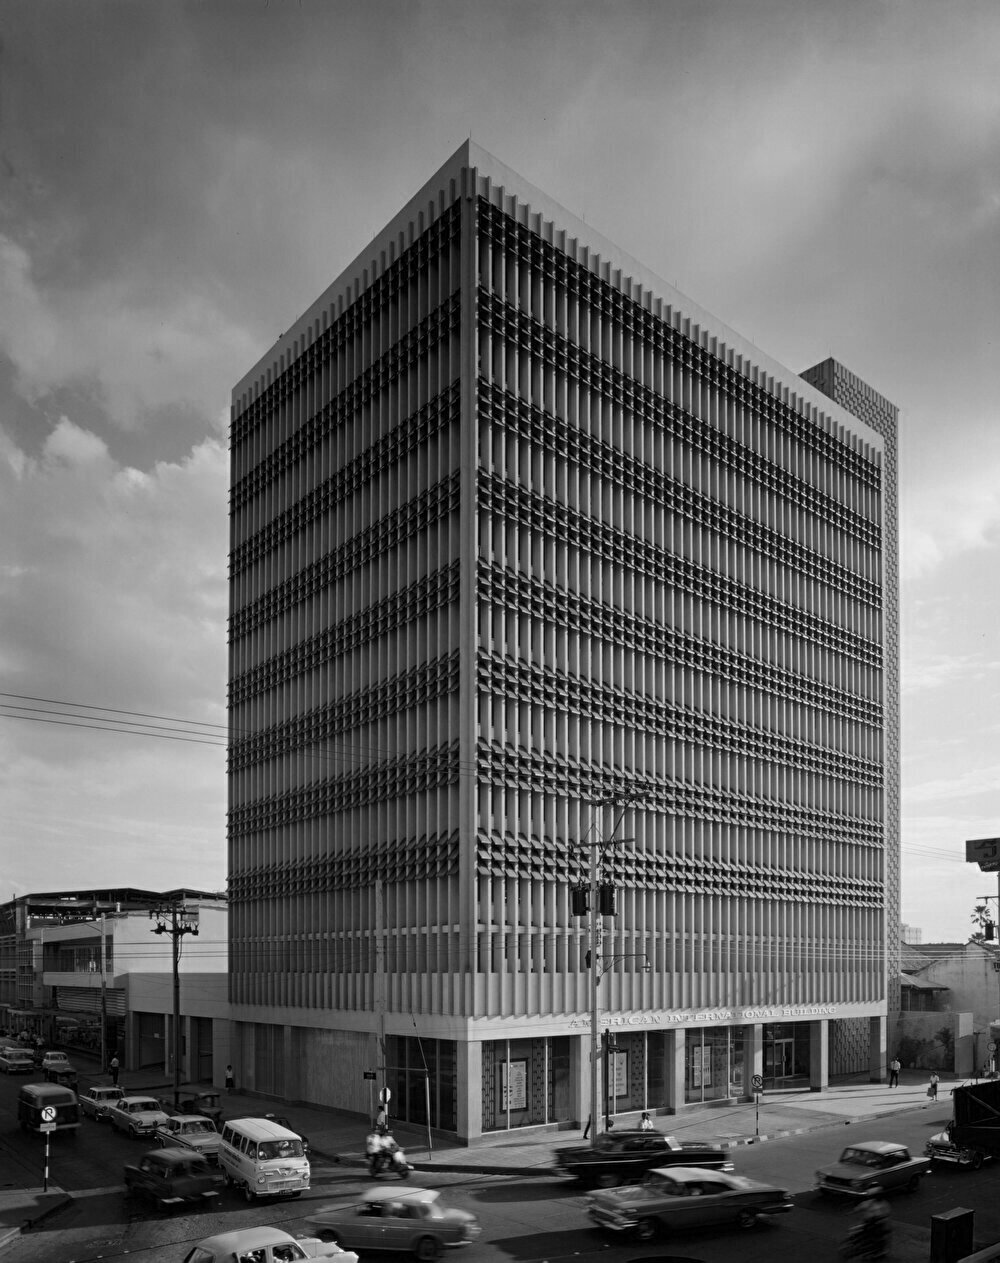 AIA Building (completed in 1966)